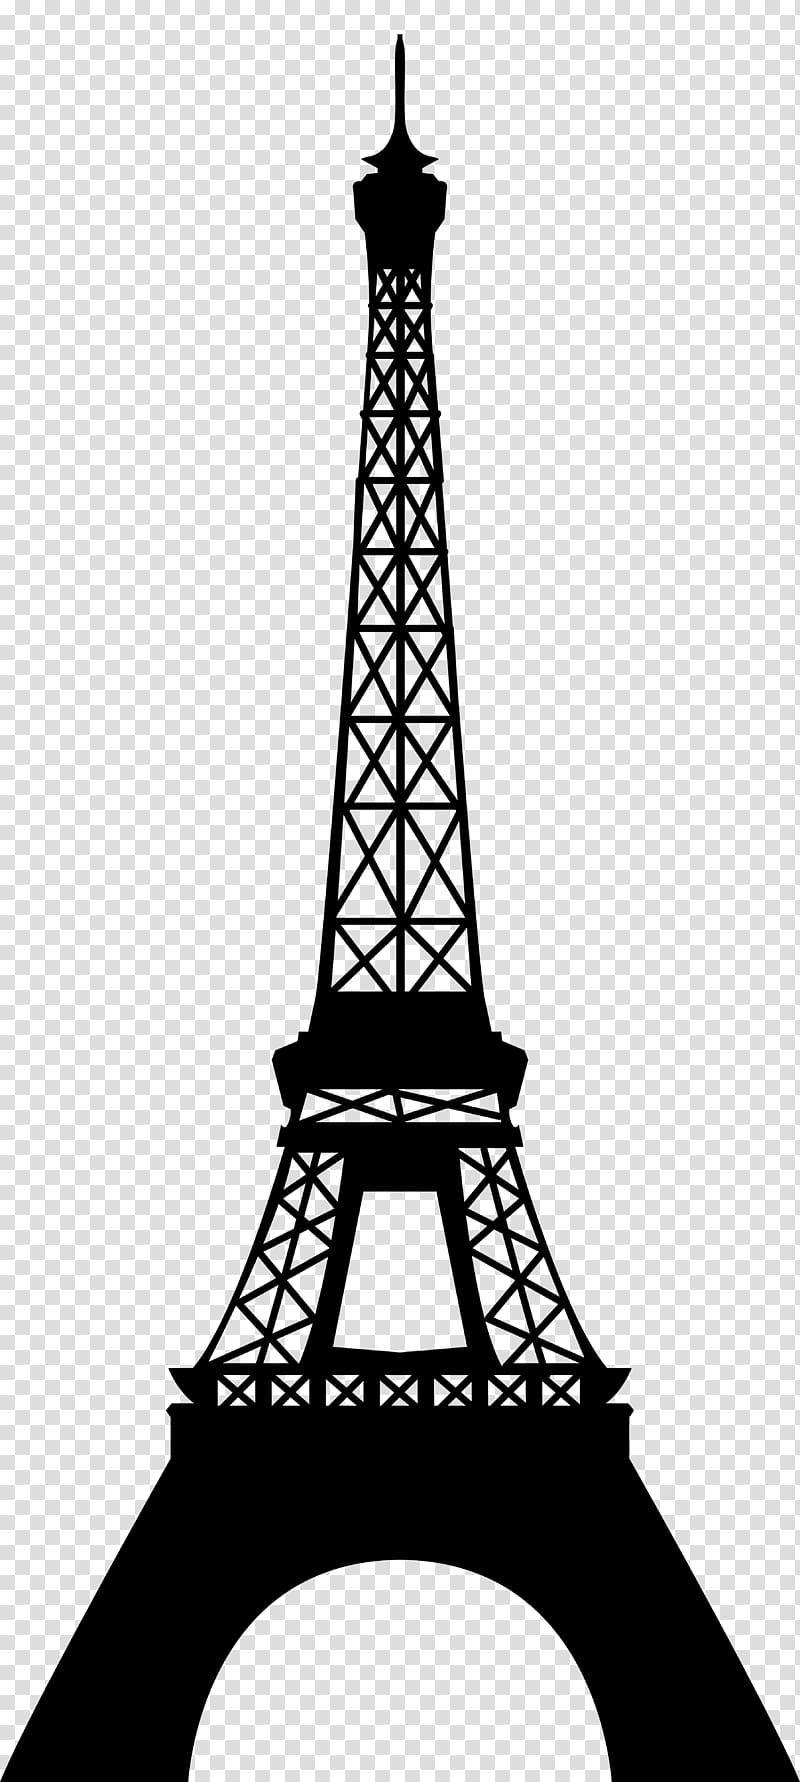 Eiffel Tower , Eiffel Tower Silhouette transparent background PNG clipart